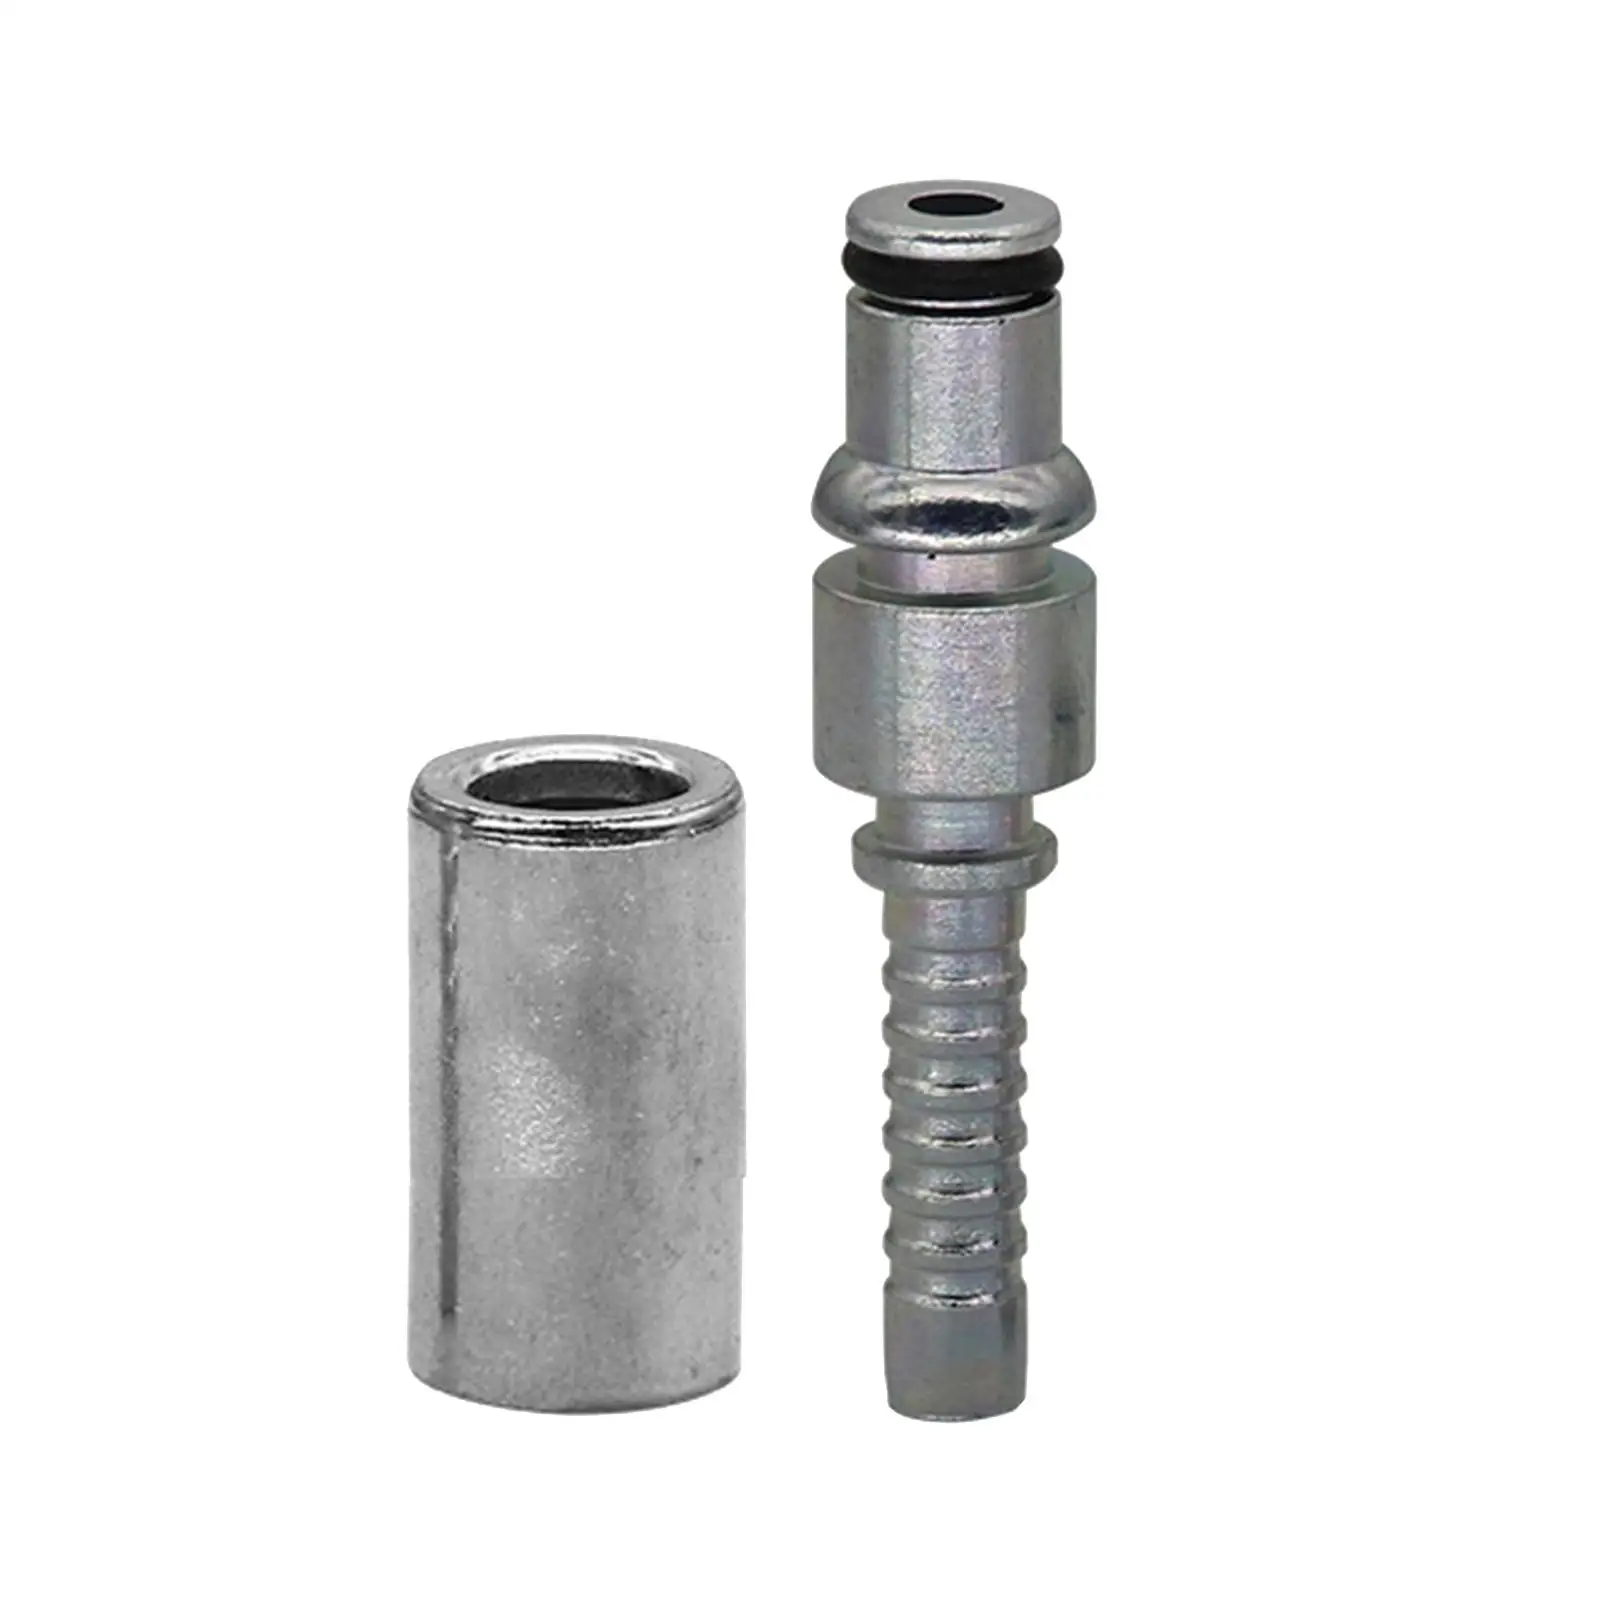 Car Washing Machine Pressure Pipe Joint Converter Repair Fitting with Sleeve Pressure Washer Pipe Tip Hose Plug Connector